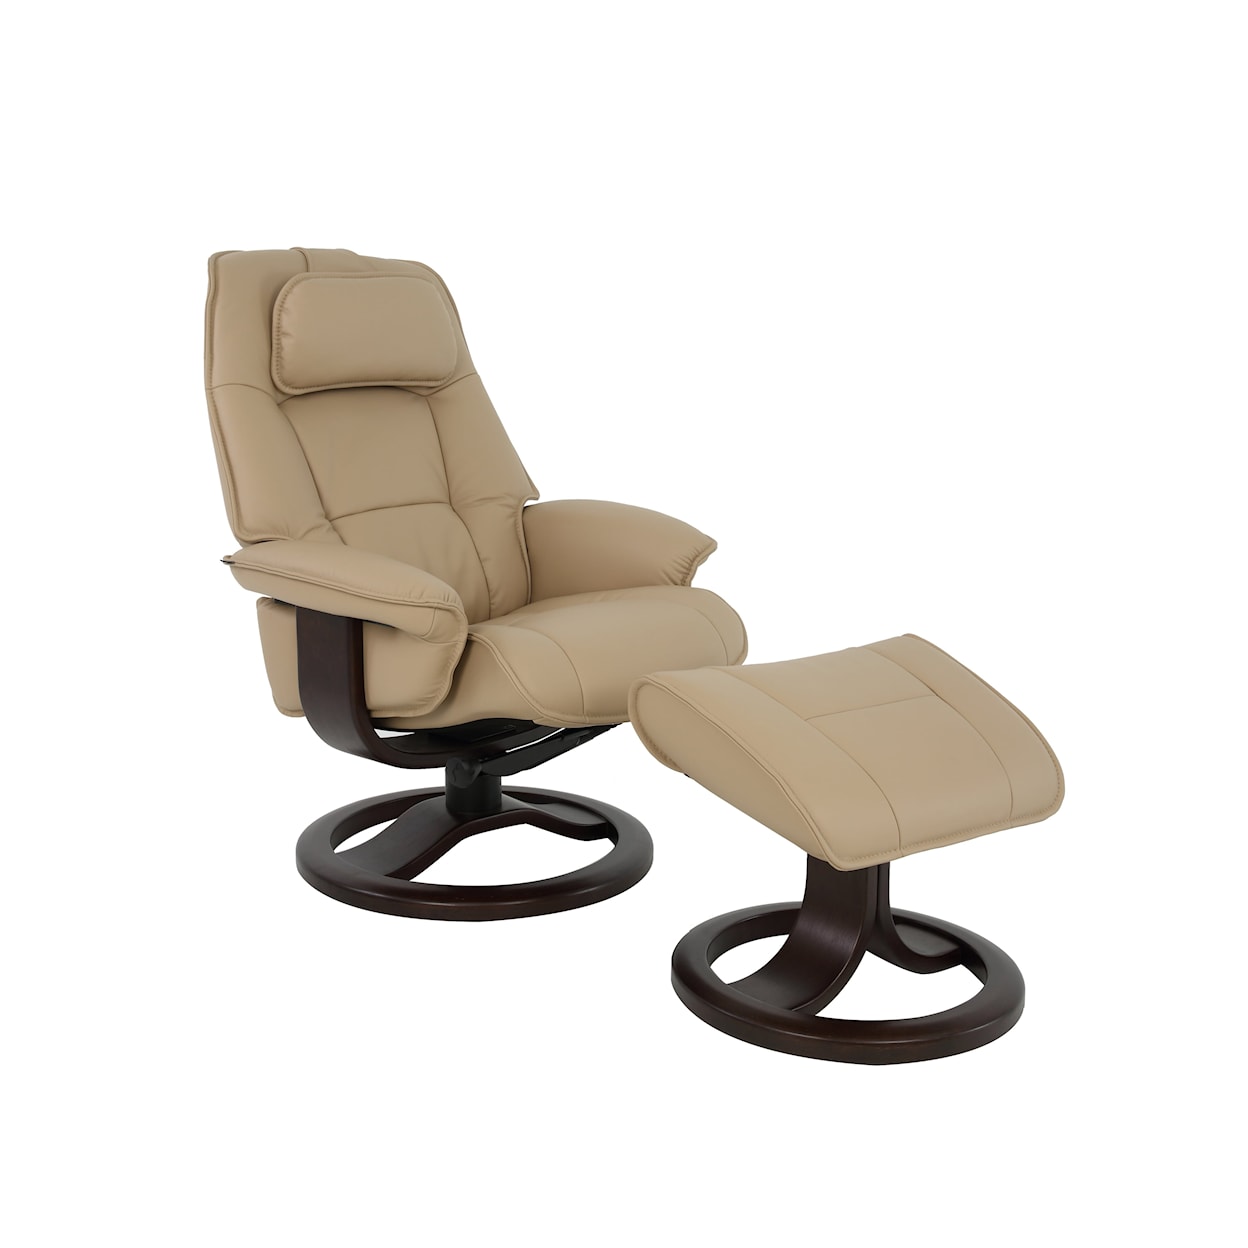 Fjords by Hjellegjerde Classic Comfort Collection Admiral R Small Manual Recliner